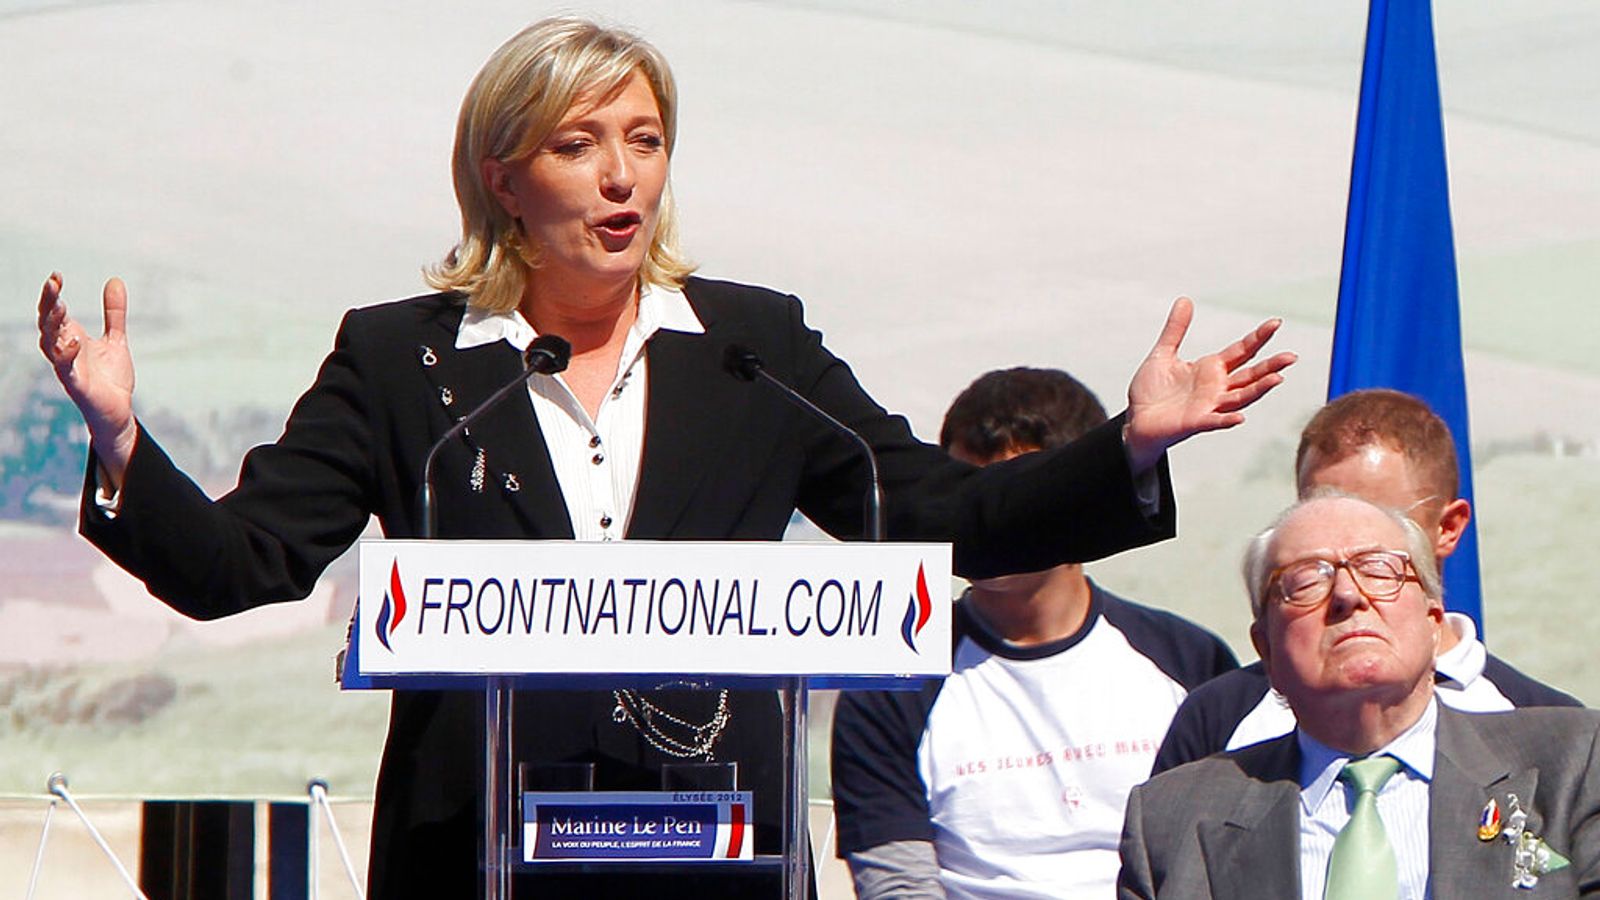 Marine Le Pen: French far-right leader could stand trial over alleged misuse of EU funds